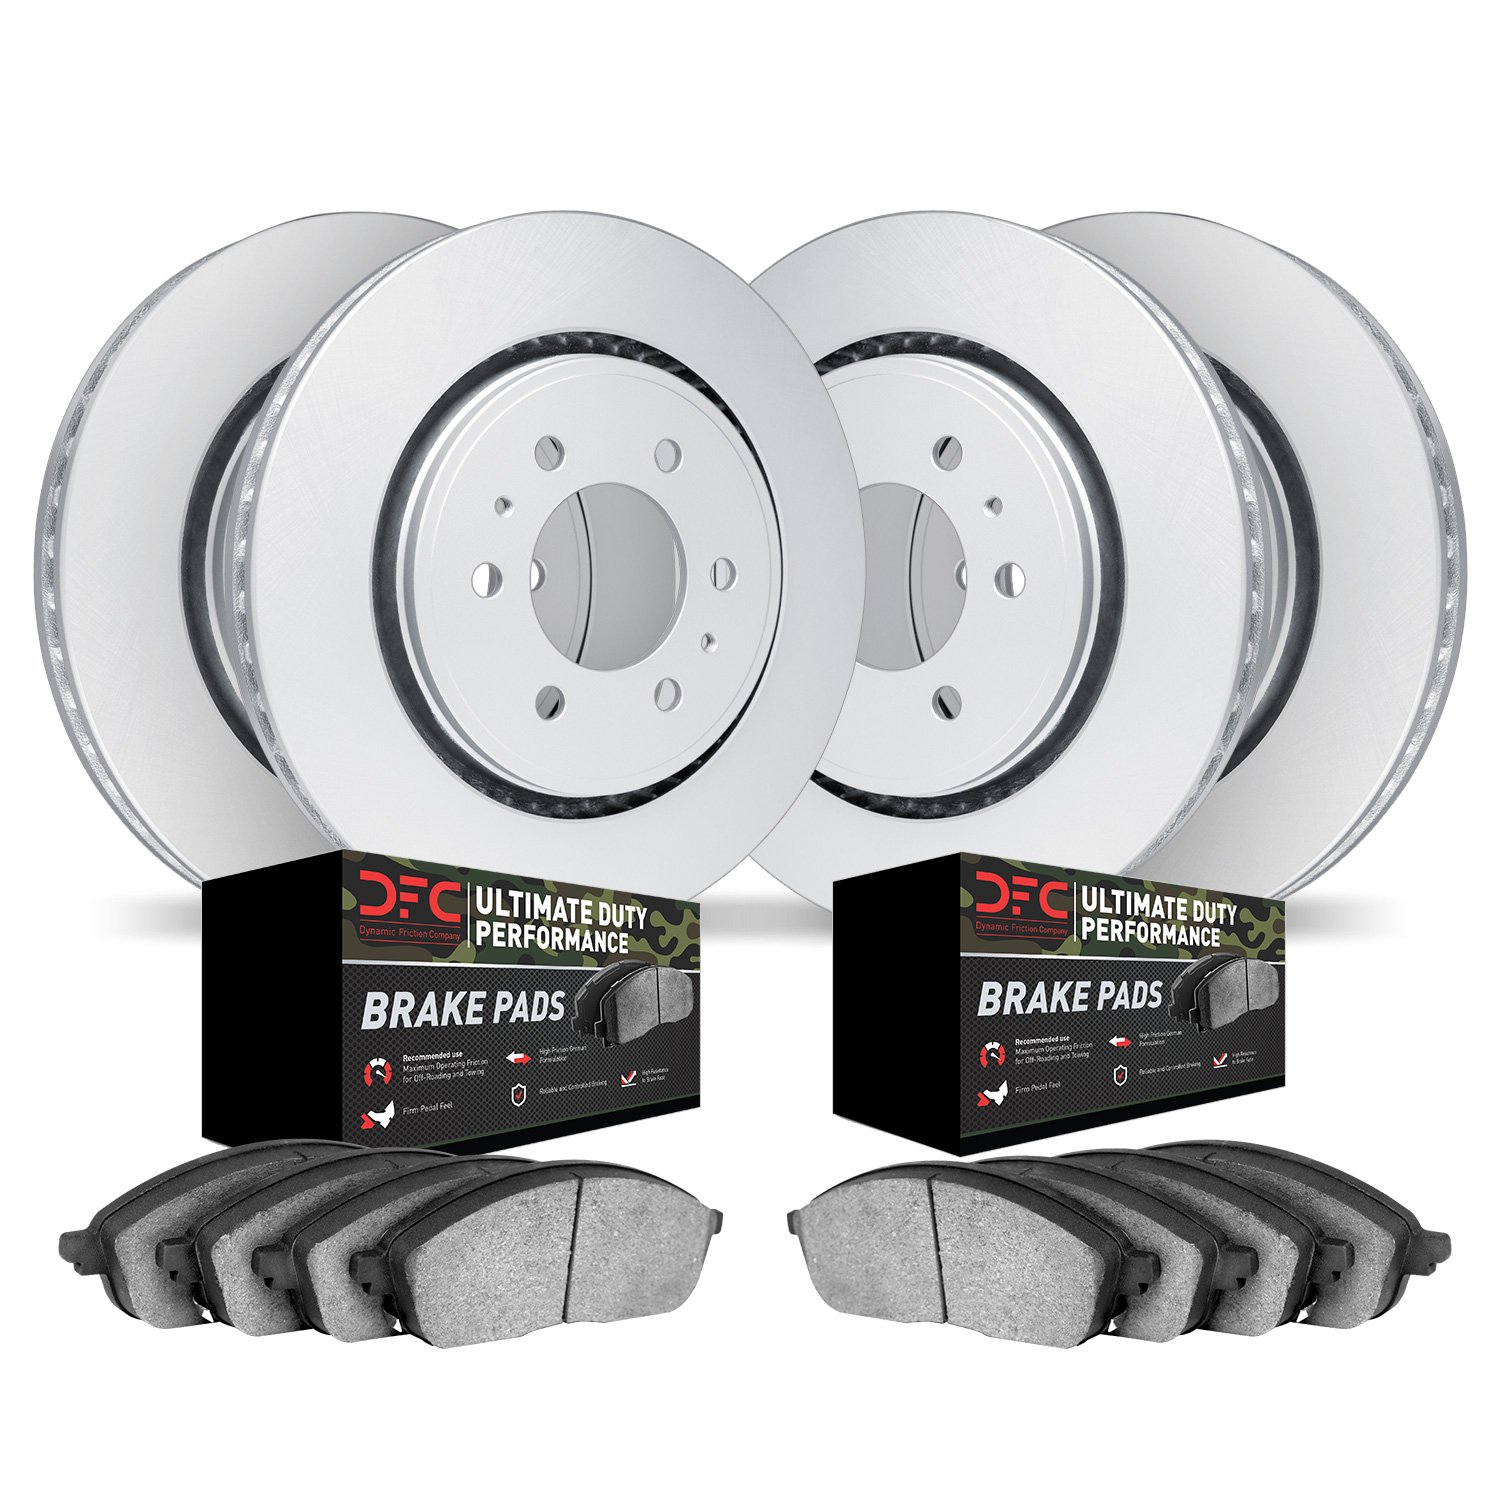 4404-67007 Geospec Brake Rotors with Ultimate-Duty Brake Pads Kit, Fits Select Infiniti/Nissan, Position: Front and Rear